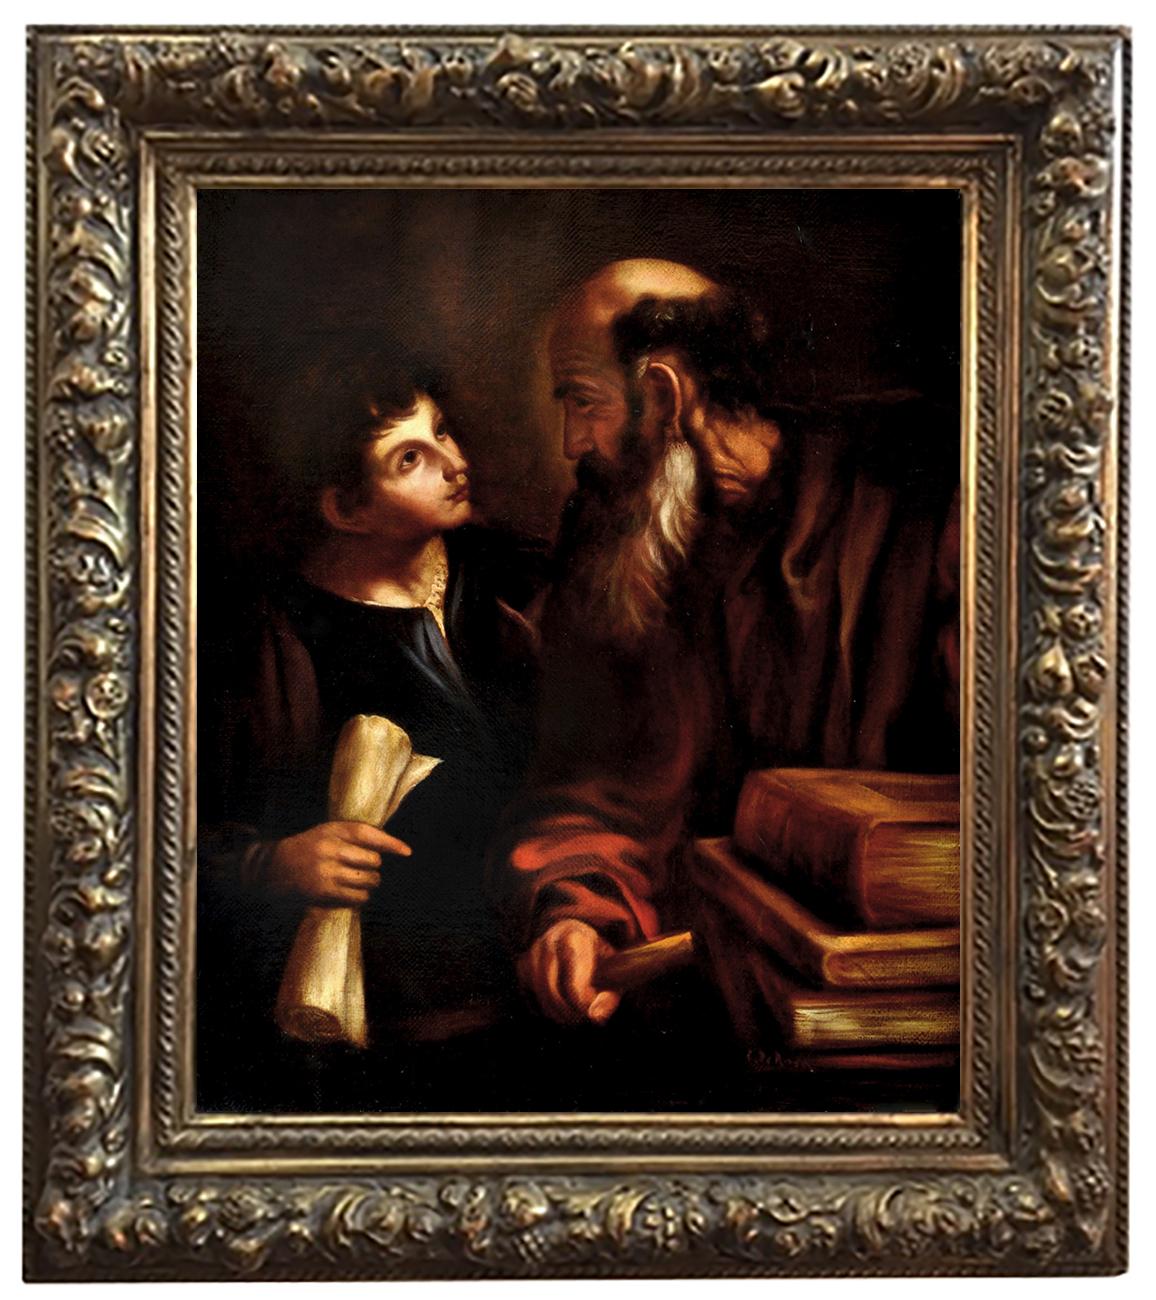 Ciro De Rosa Portrait Painting - YOUTH AND WISDOM- In the Manner of Caravaggio  Figurative Oil on Canvas Painting